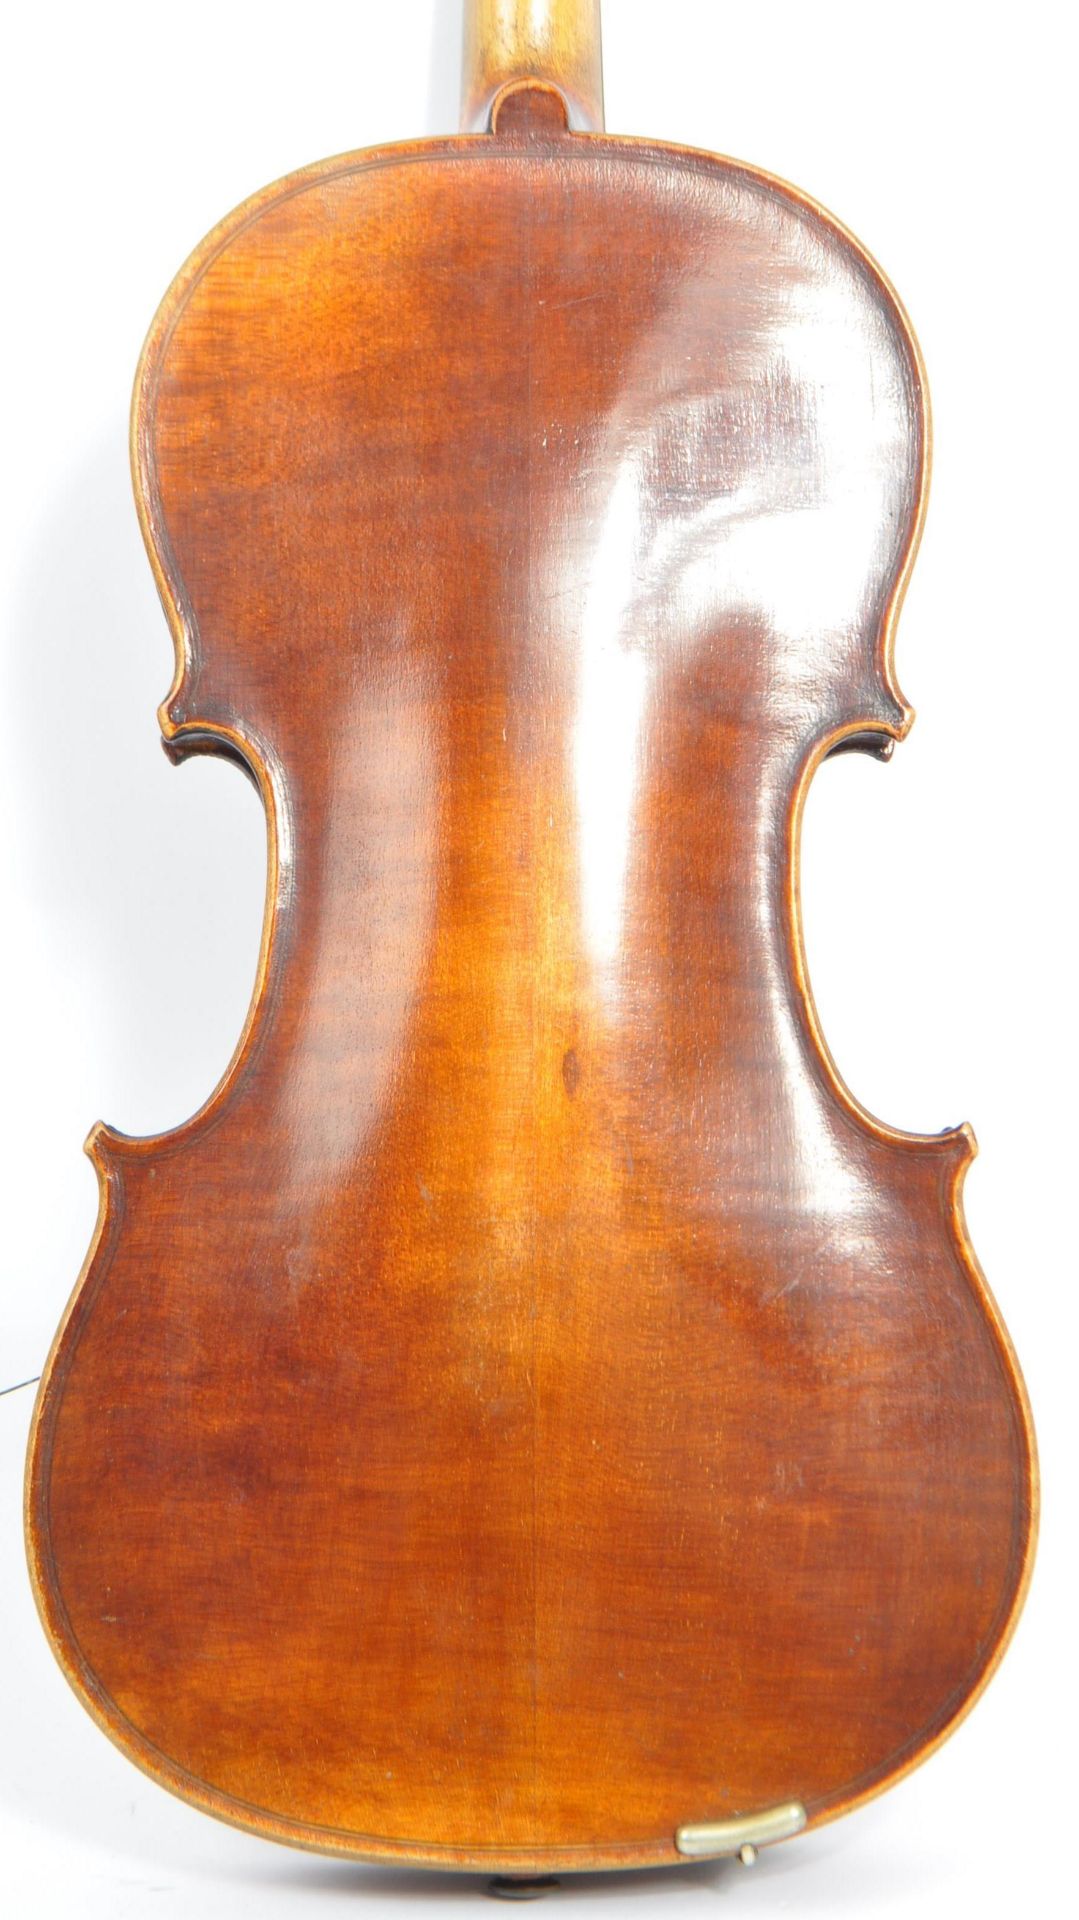 20TH CENTURY FULL SIZE VIOLIN WITH TWO PIECE BACK - Image 5 of 10